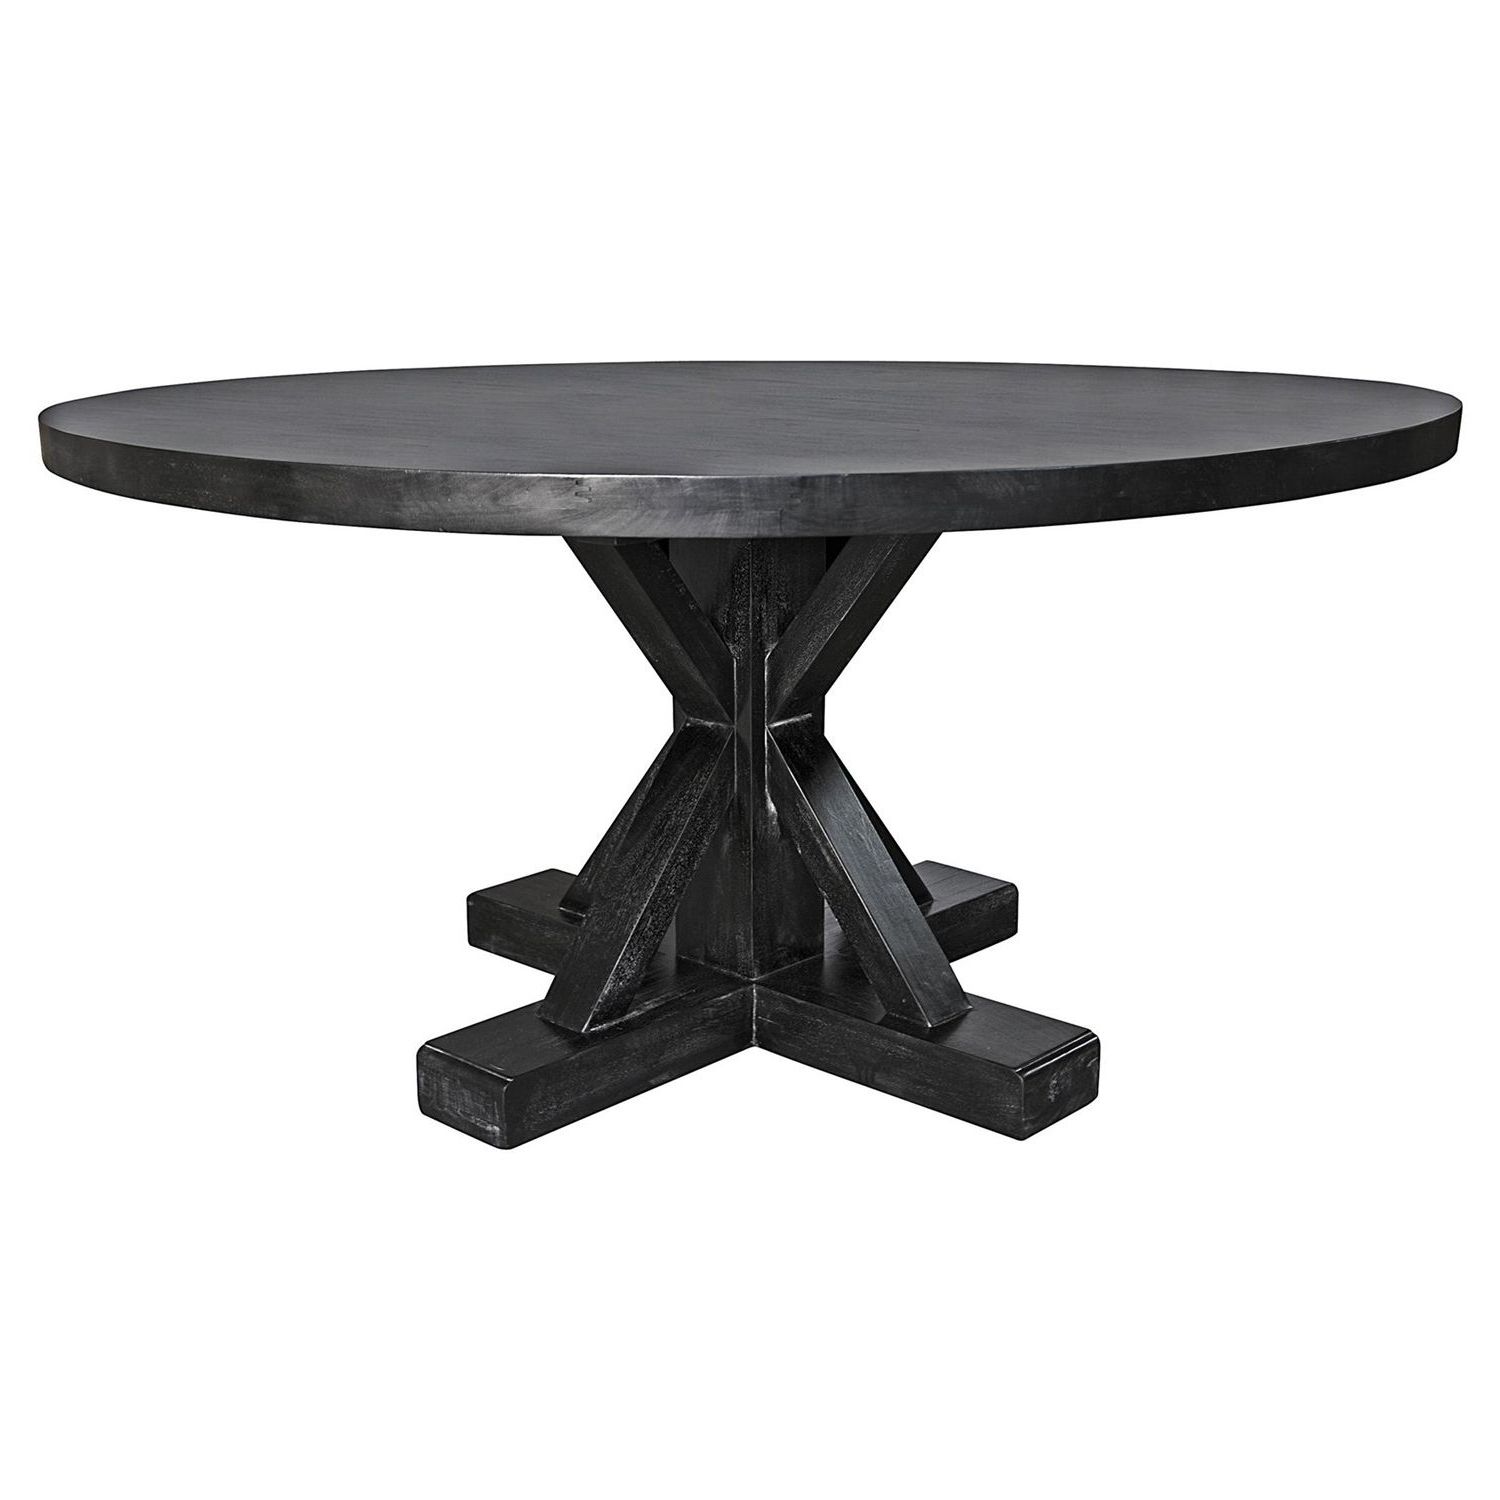 Noir Criss Cross Hand Rubbed Black Dining Table @laylagrayce (View 8 of 25)